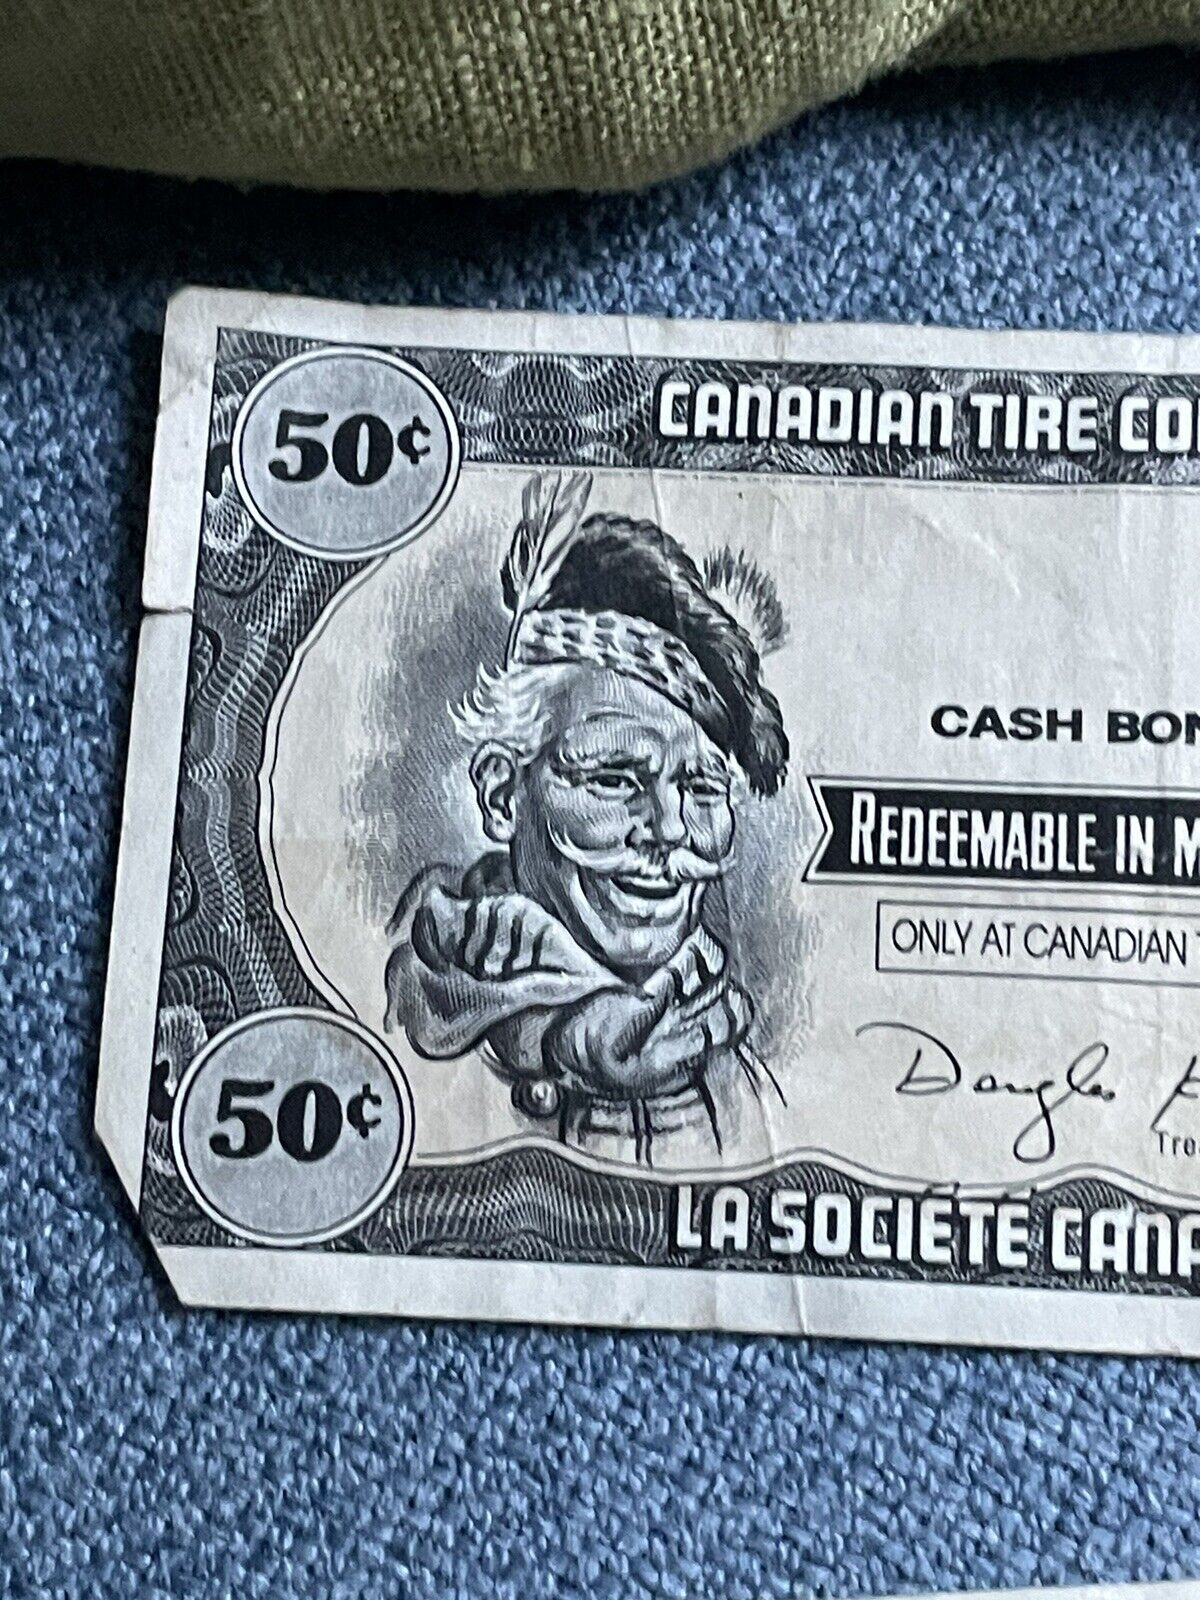 Canadian tire money 50 cent 1985 printed in Canada Official CDN Tire vintage